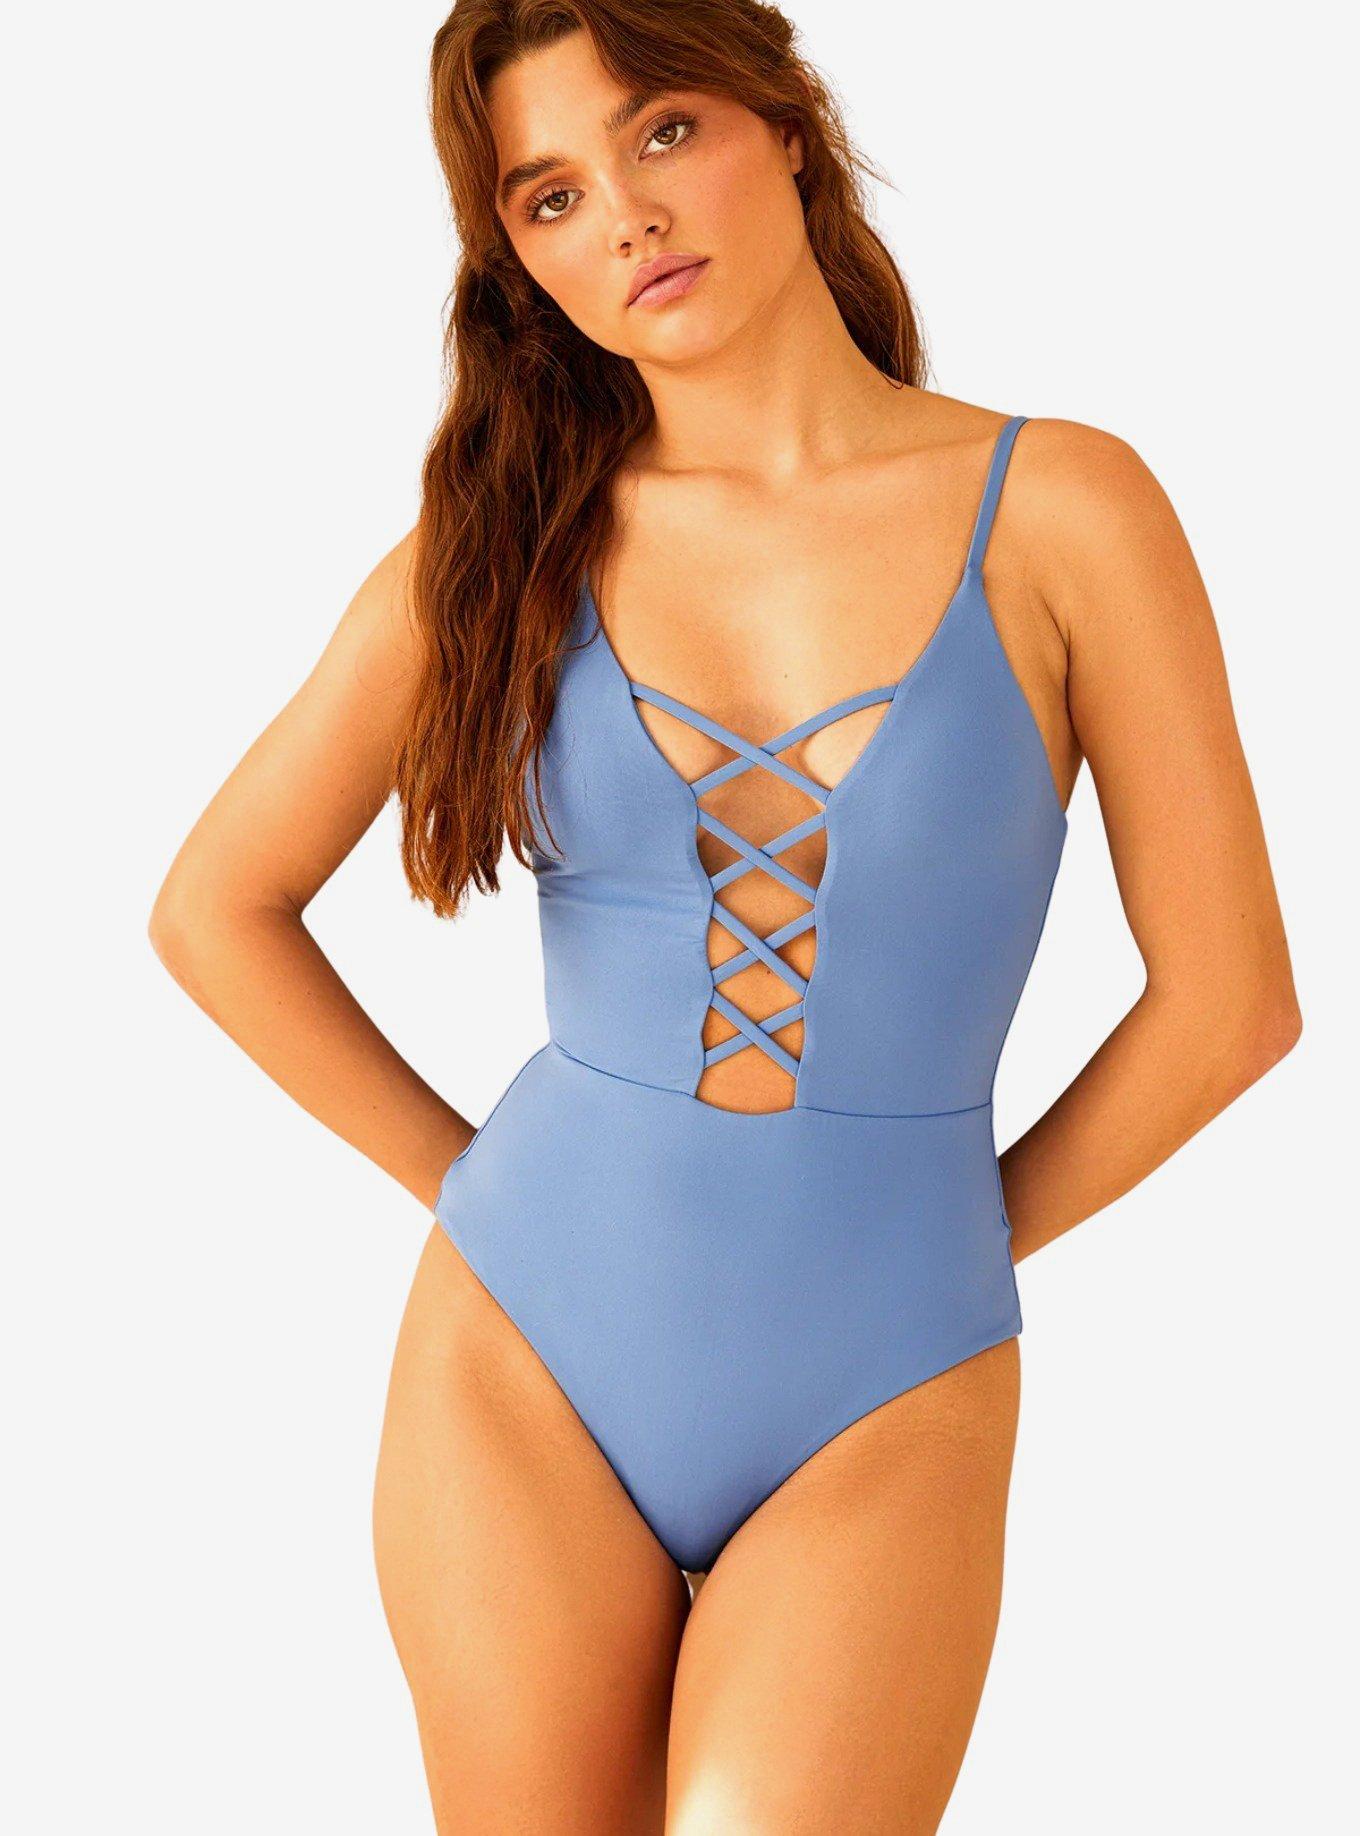 Dippin' Daisy's Bliss Swim One Piece South Pacific Blue, POWDER BLUE, hi-res